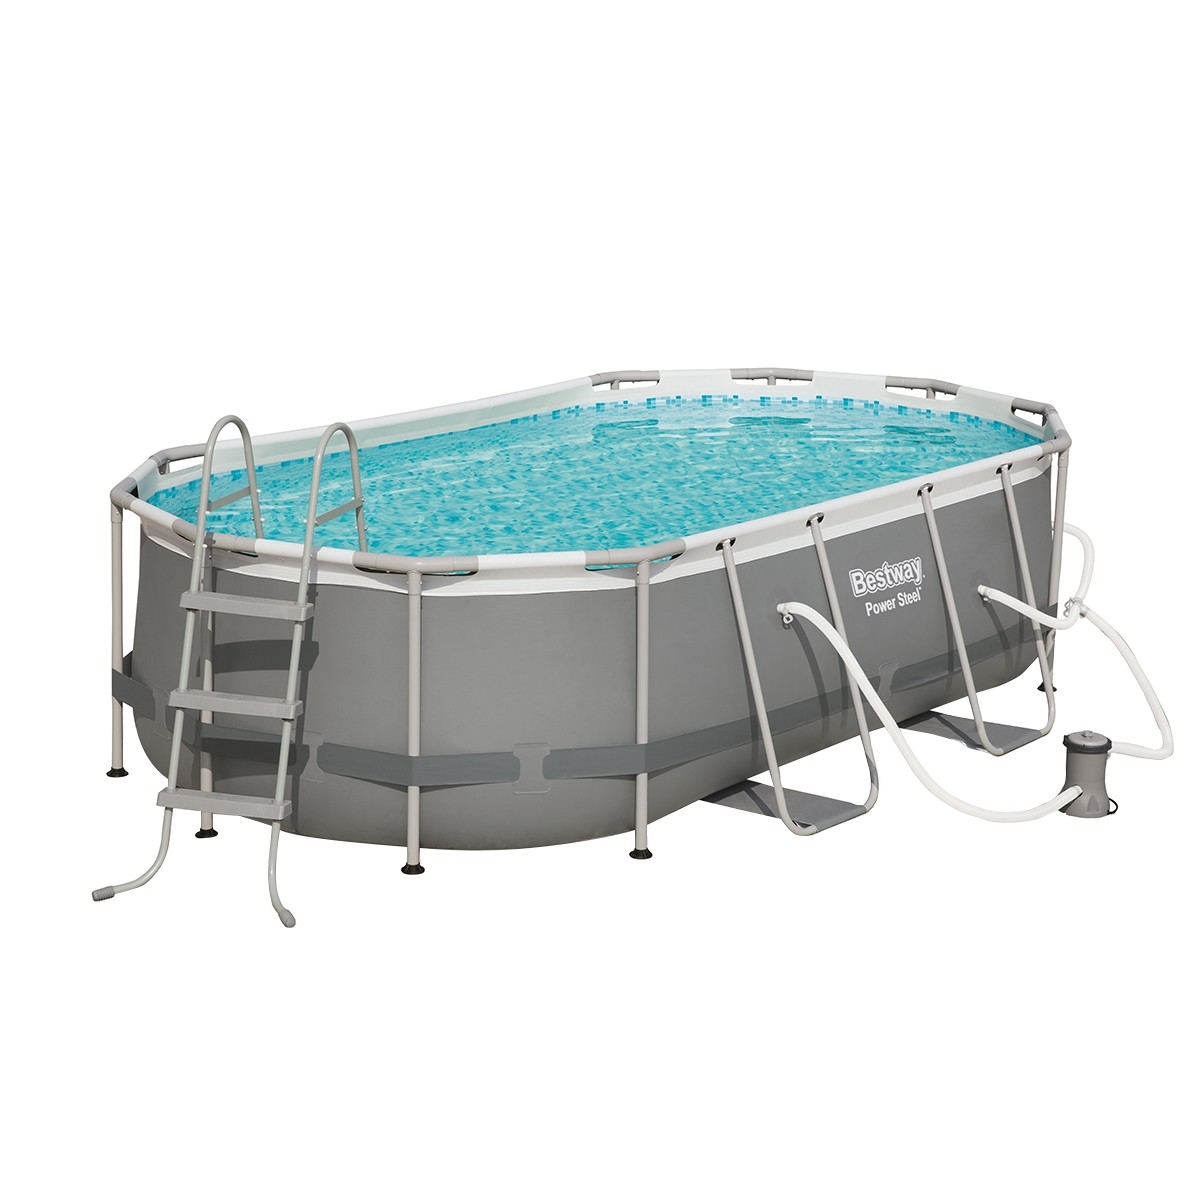 Bestway 4.27m Power Steel Frame Above-Ground Oval Pool Set with Filter Pump